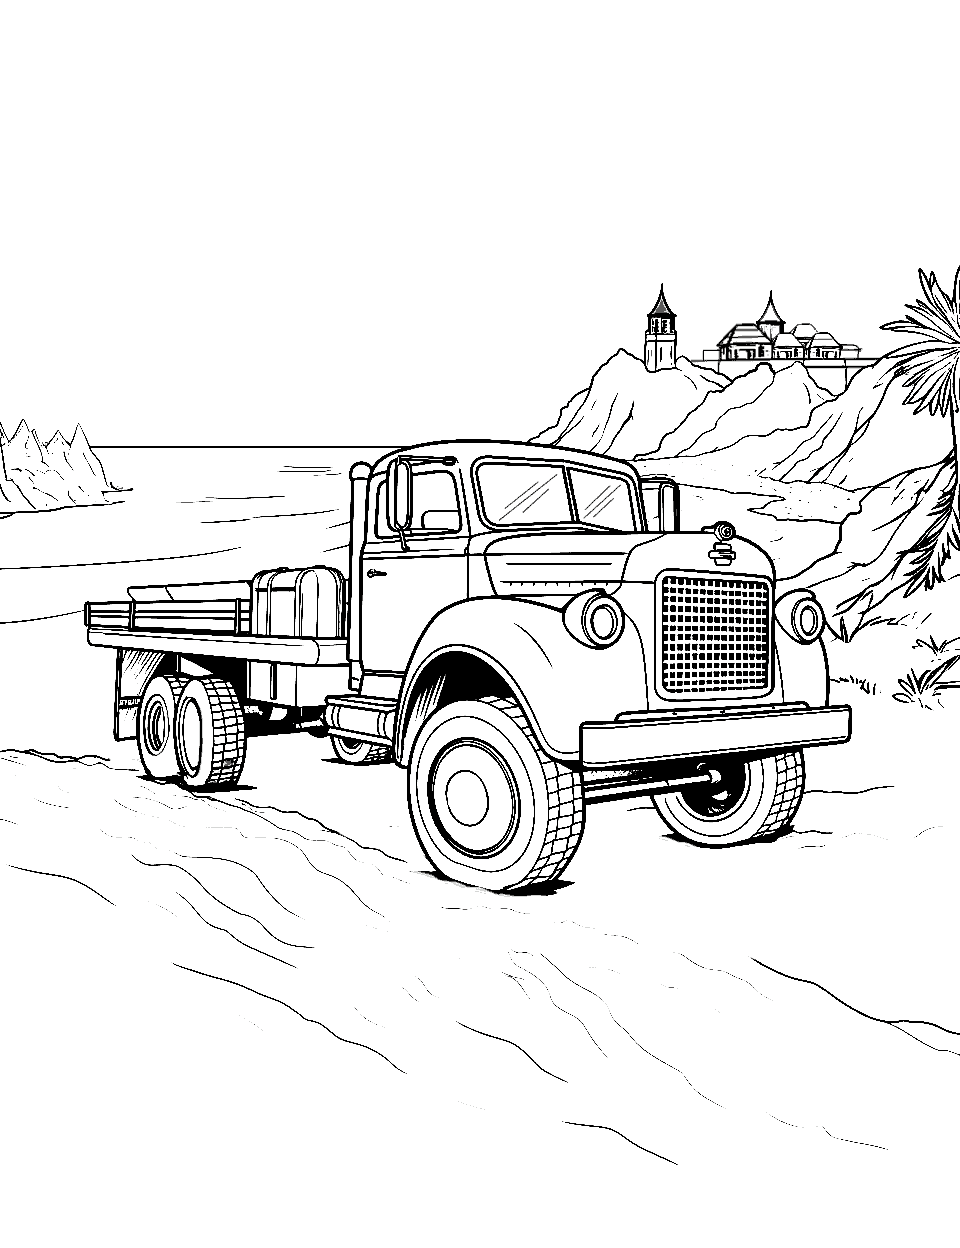 Beach Day Fun Coloring Page - A truck parked on the beach with houses in the distant background.